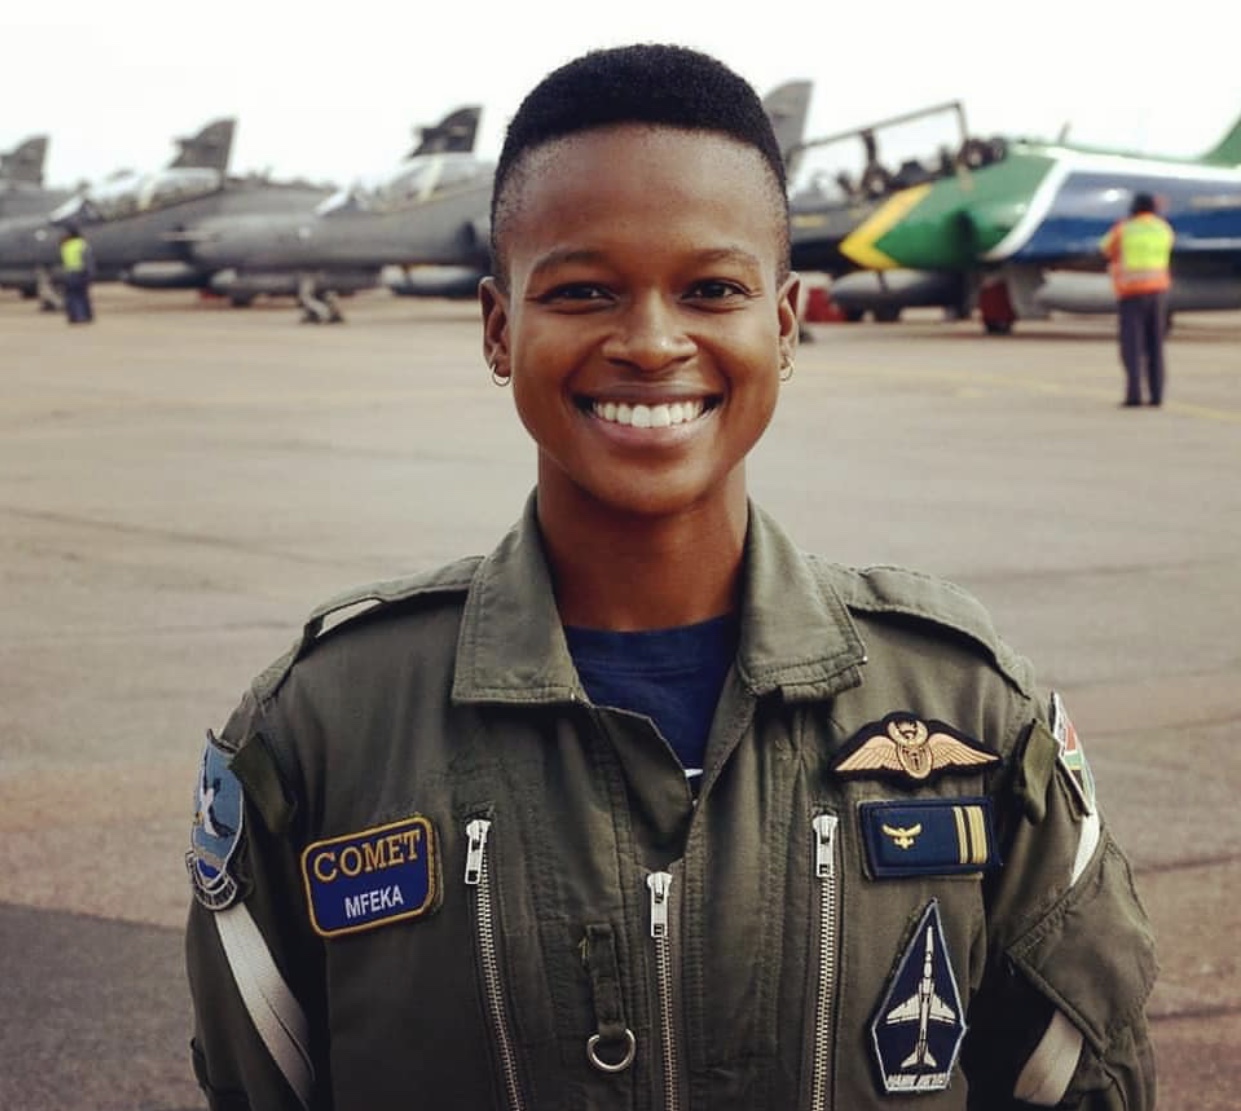 Major Mandisa Mfeka, the World's First Black Woman Combat Pilot From South Africa